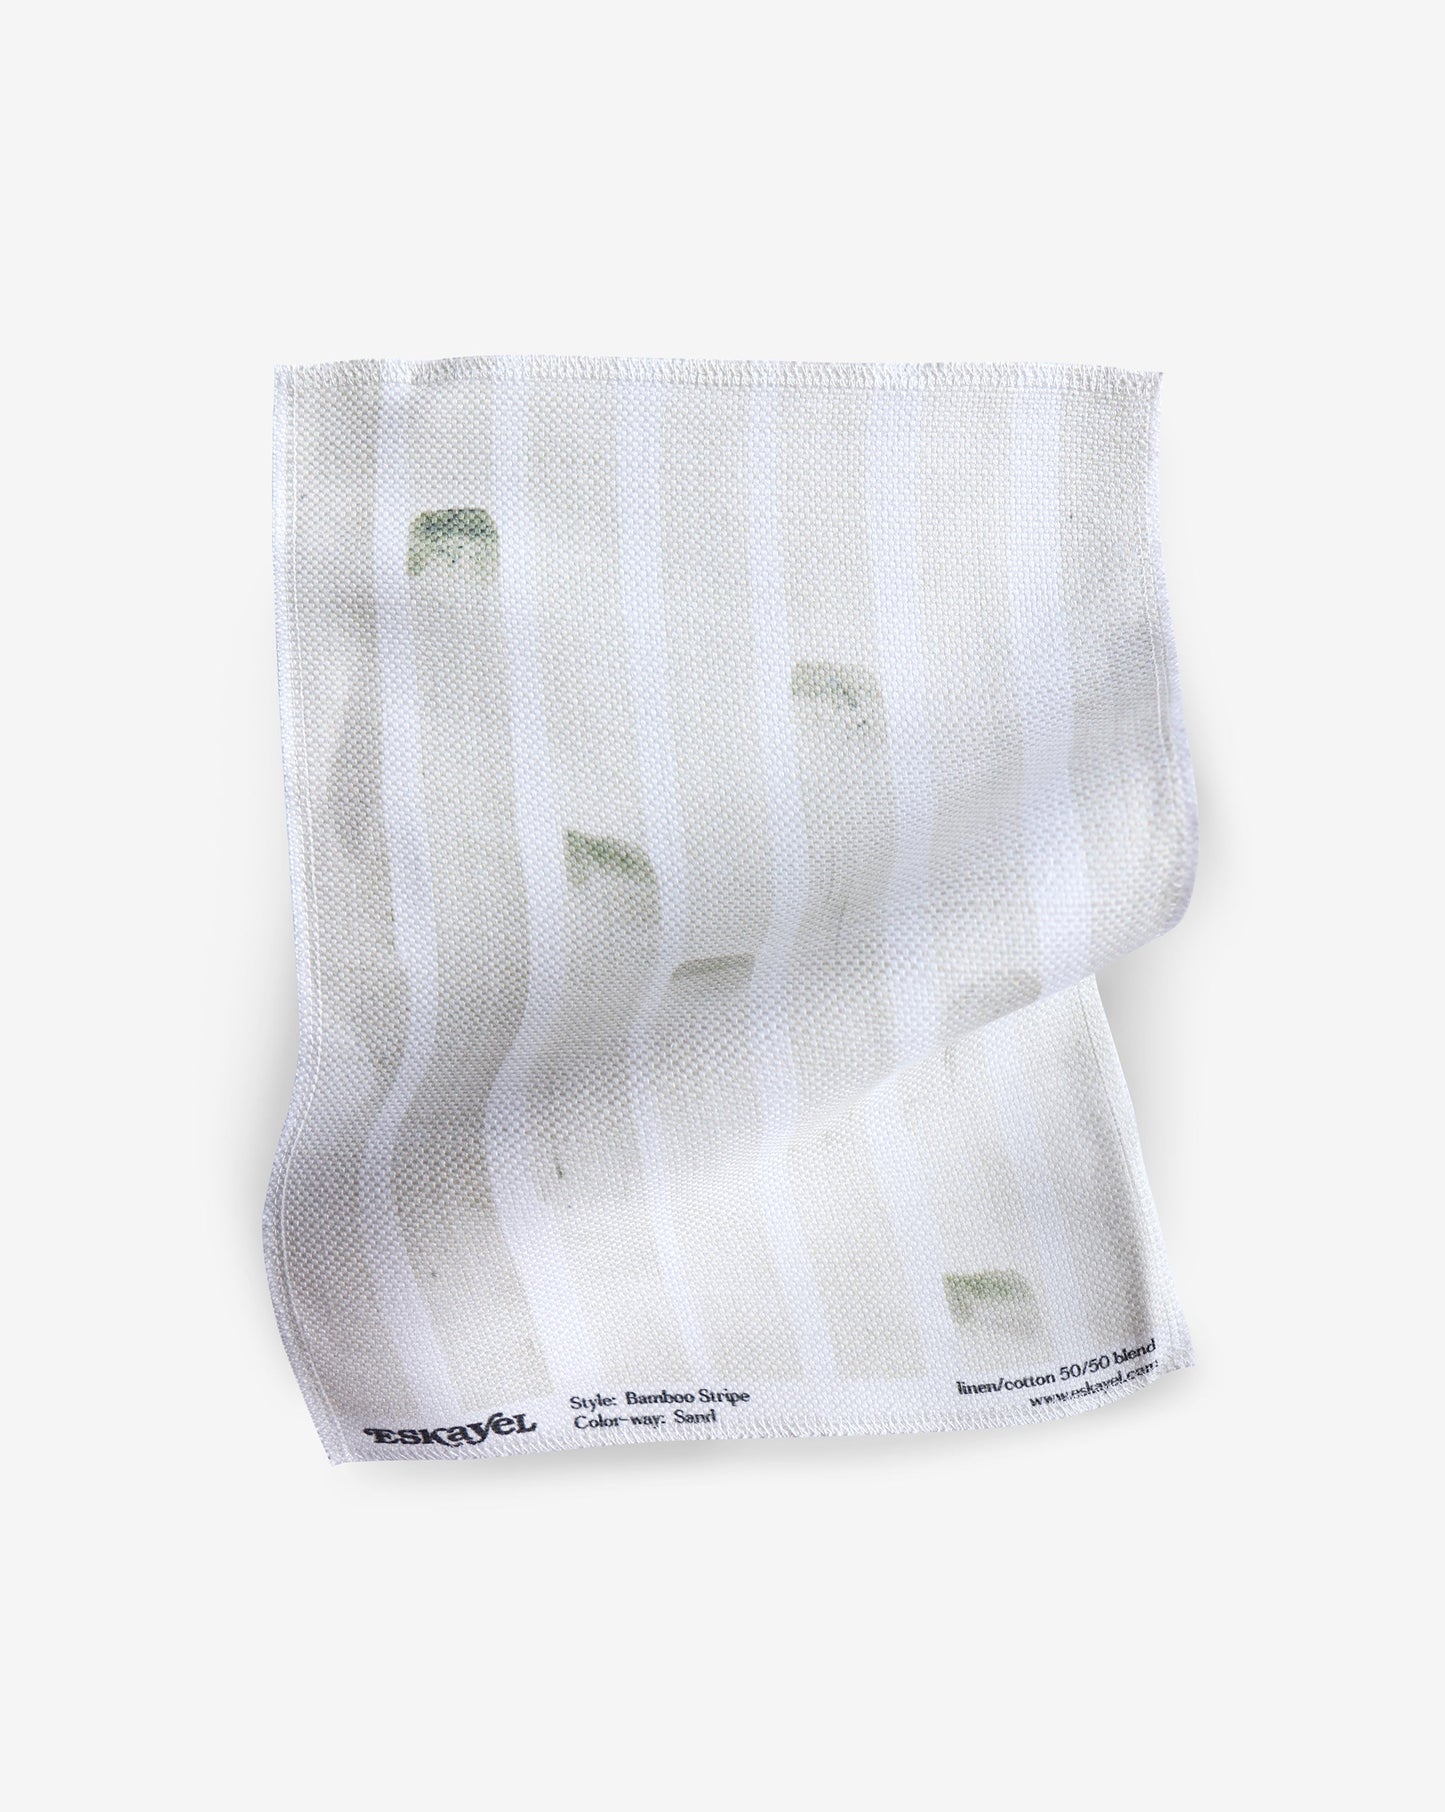 A white Bamboo Stripe Fabric hankerchief with green stripes on it